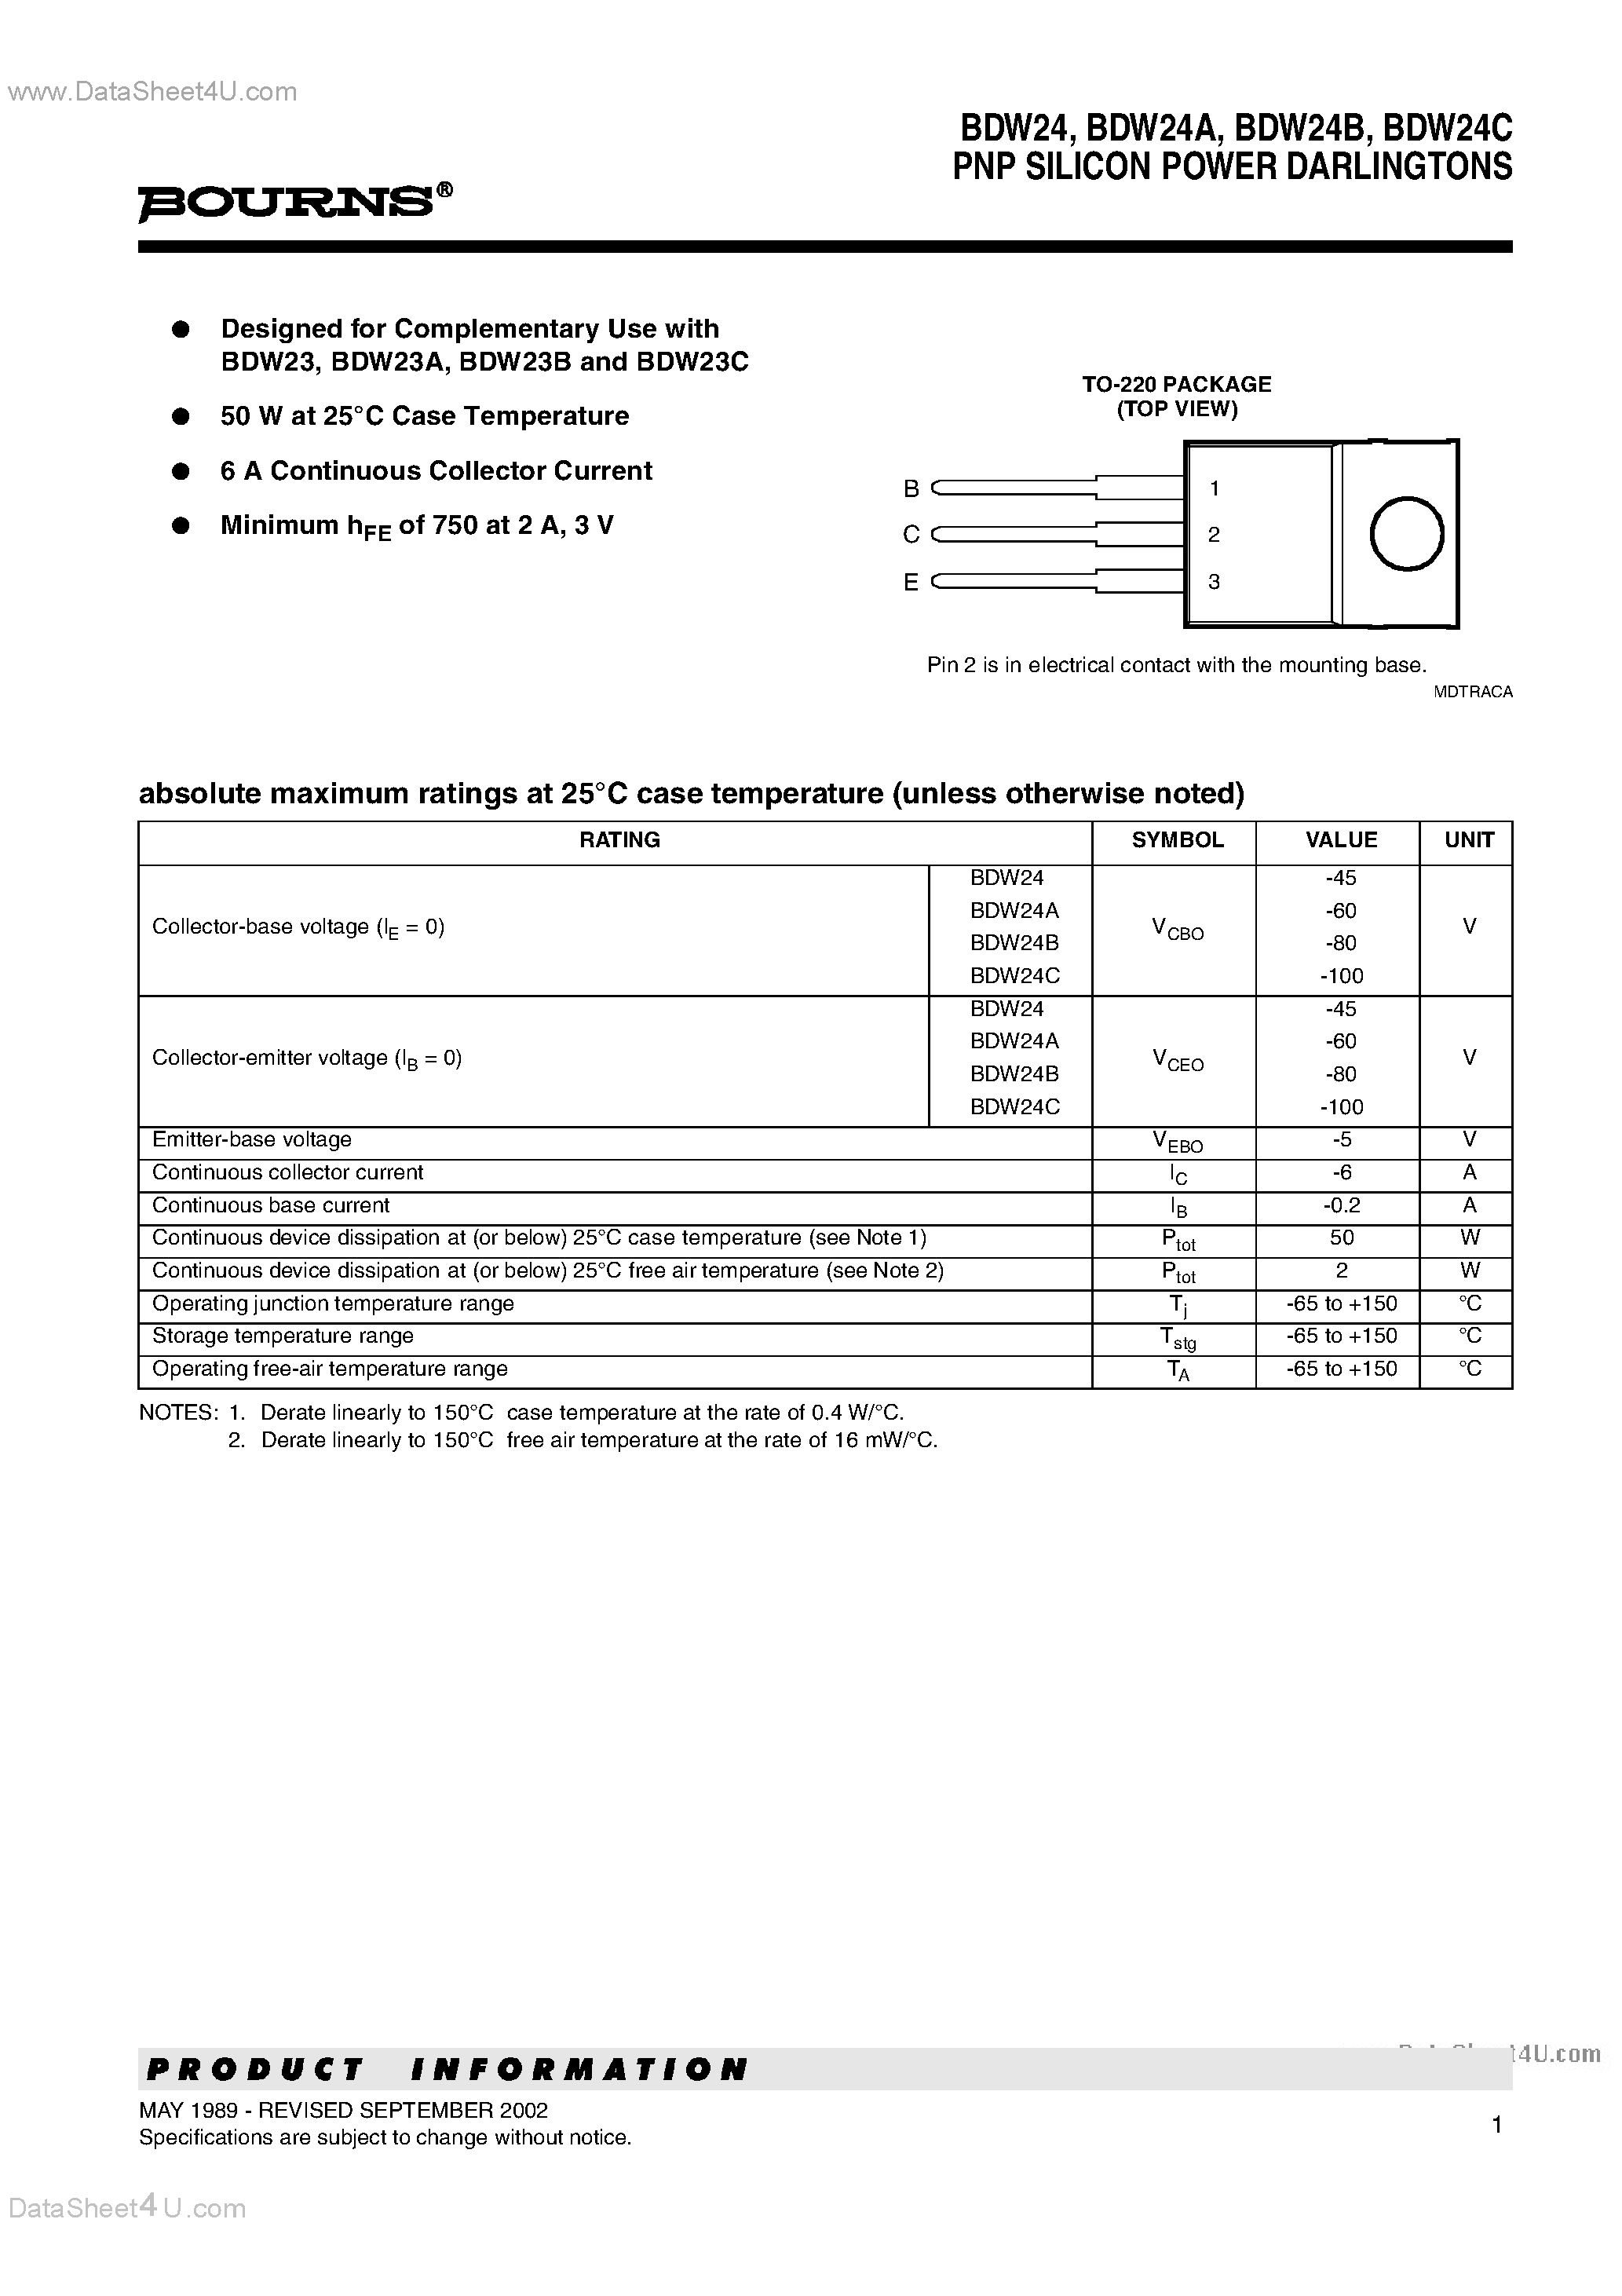 Datasheet BDW24 - PNP SILICON POWER DARLINGTONS page 1